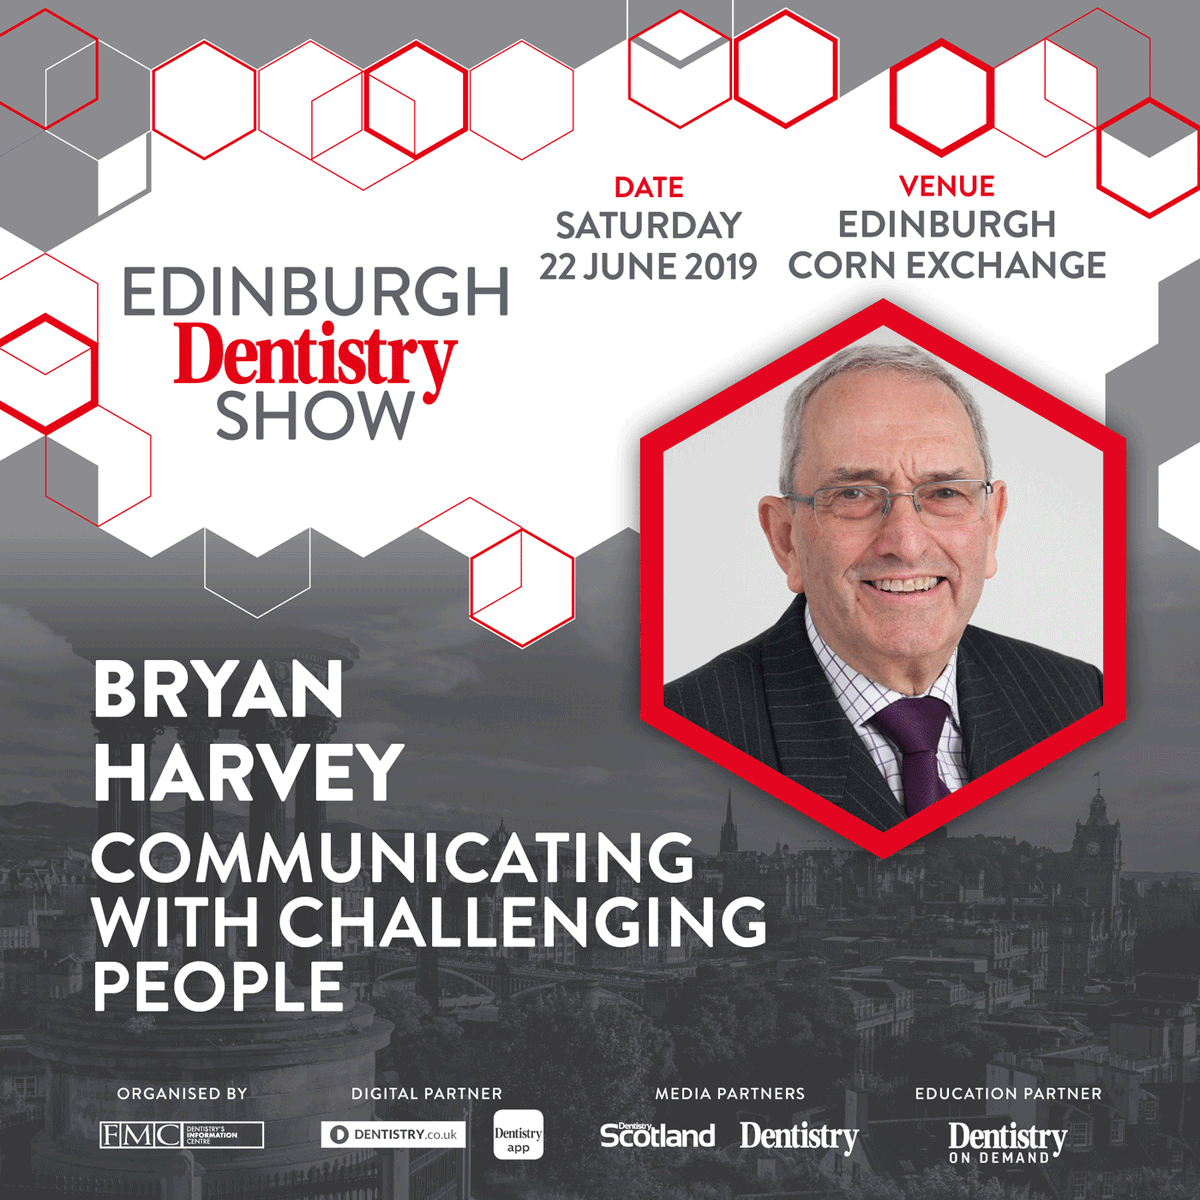 Bryan Harvey will provide insight on communicating with challenging people at the unmissable Edinburgh Dentistry Show on 22 June! Get your free ticket now! 
👉 bit.ly/2EqMOiR 👈  

#edinburghdentistryshow #dentist #dentistry #dentistrylove #dentistedinburgh